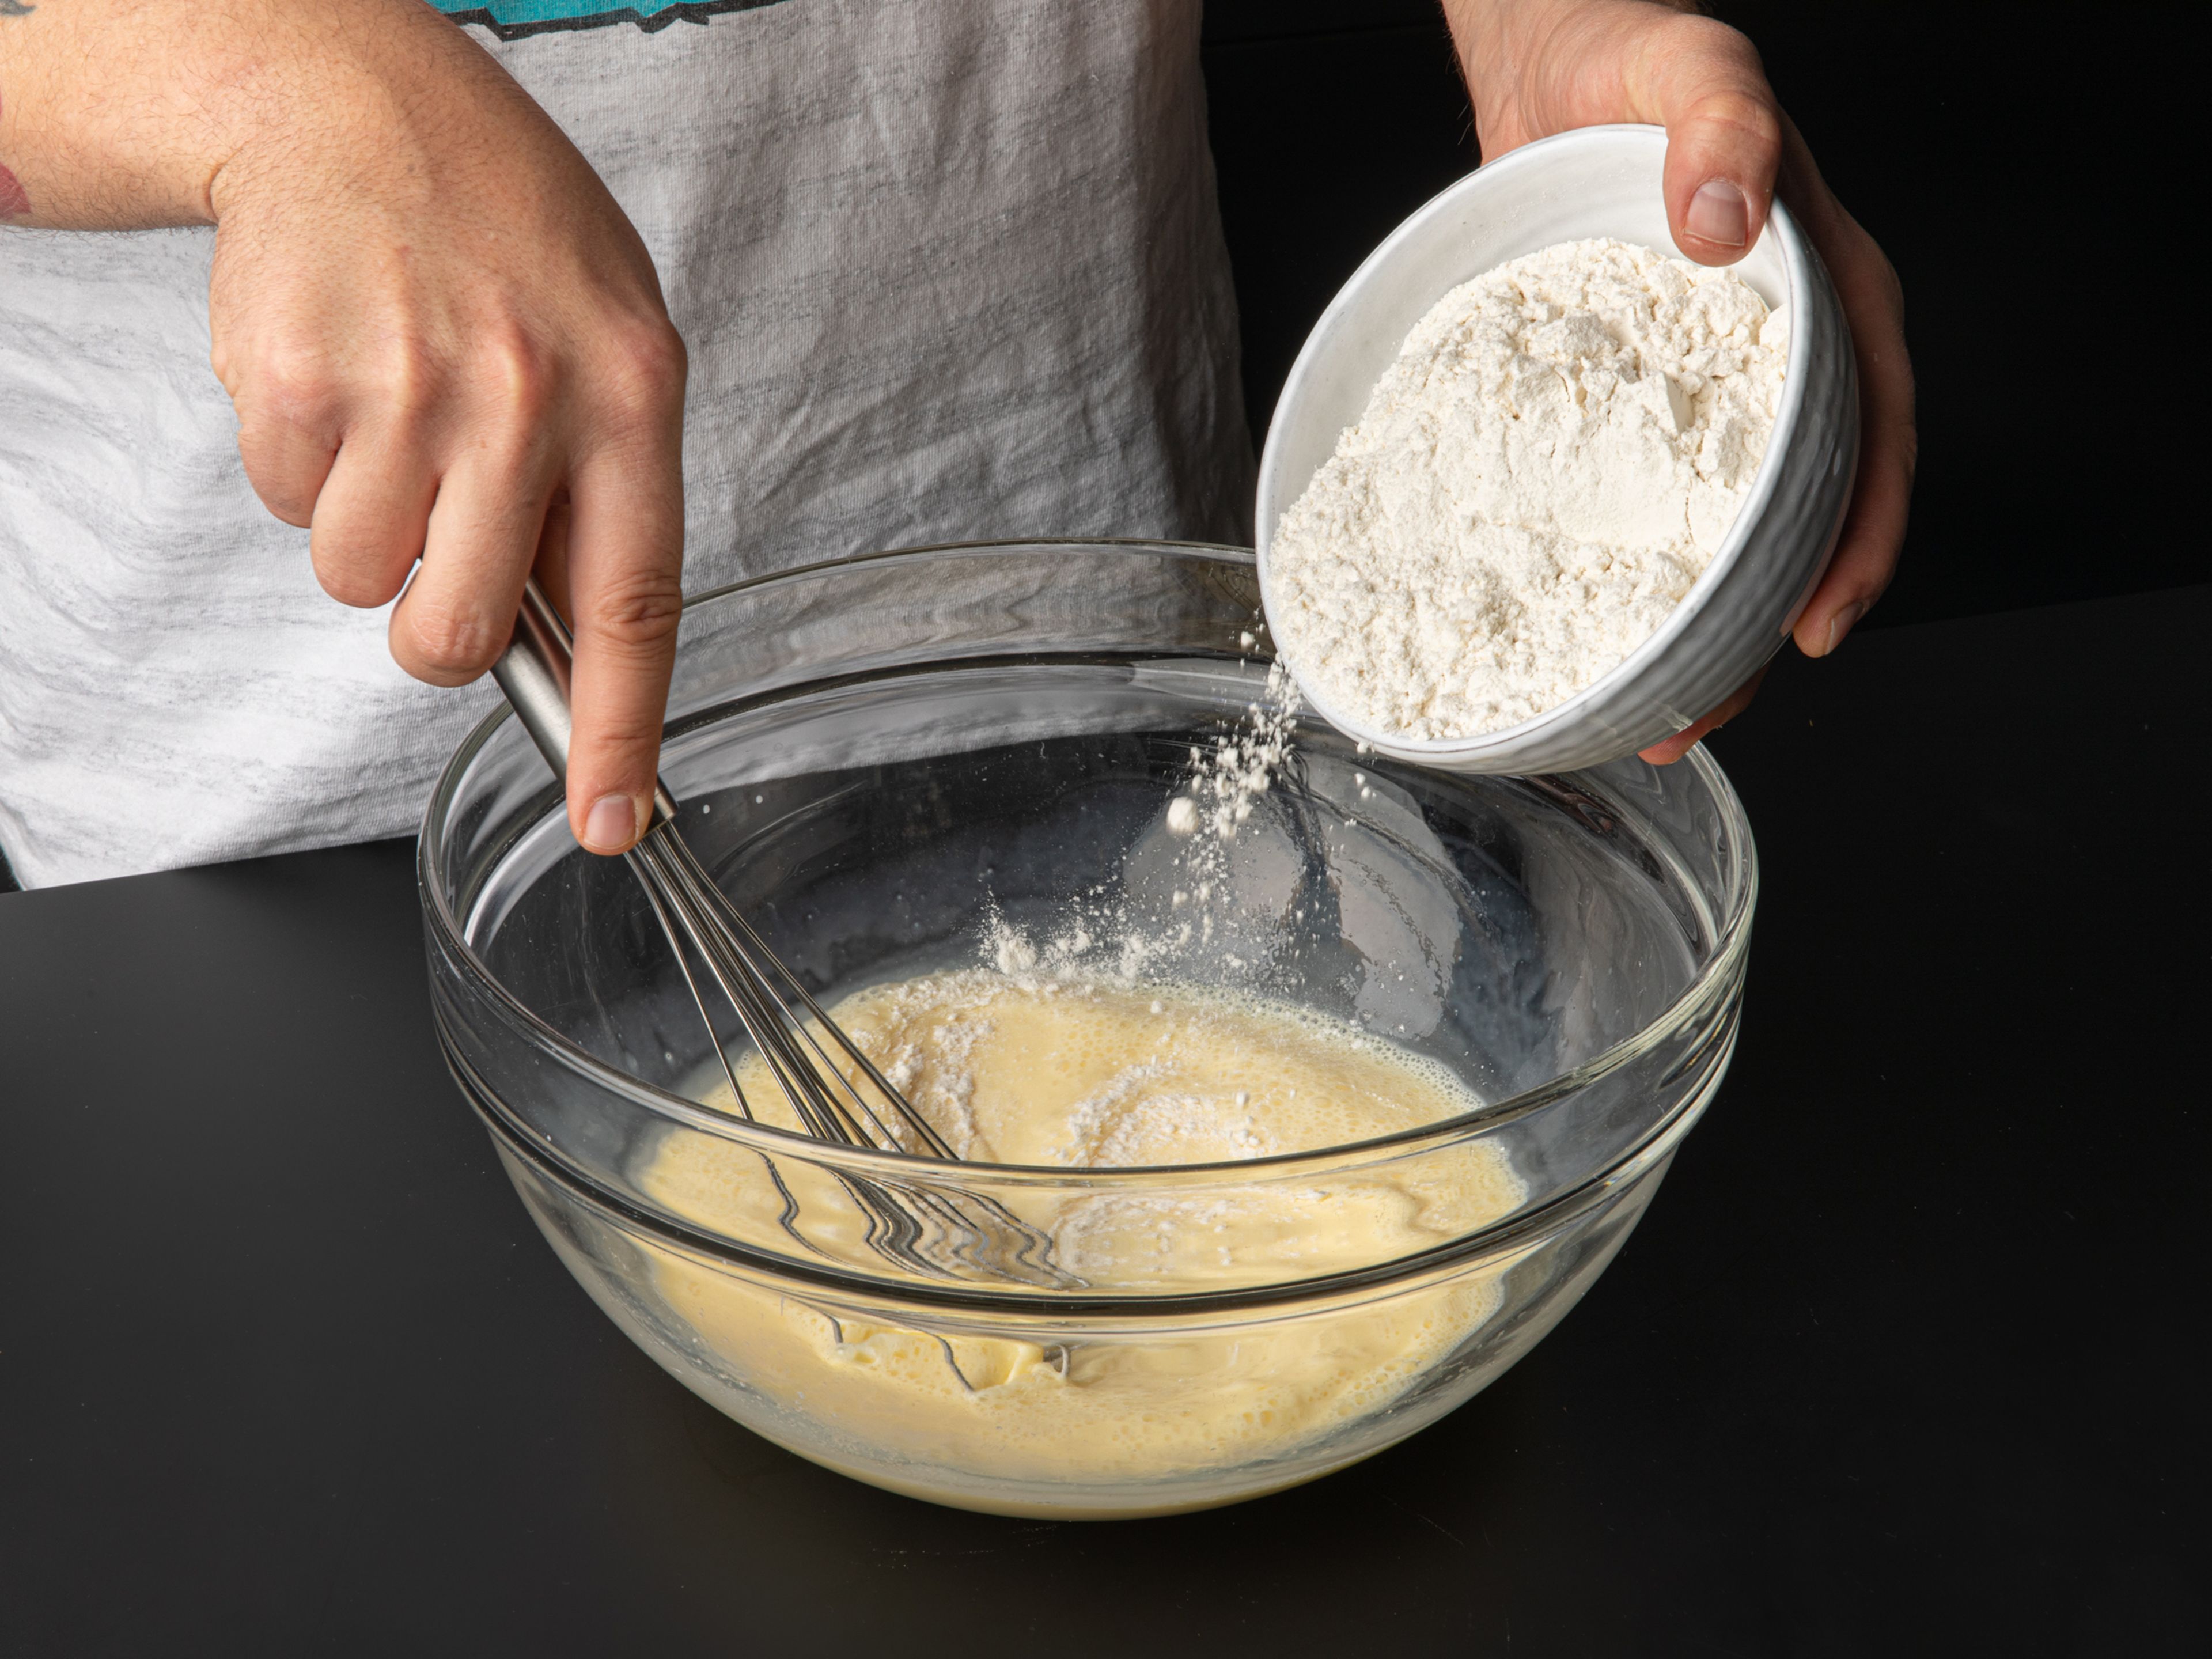 Whisk eggs, milk, sparkling water, sugar, and a pinch of salt together in a large bowl. Gradually mix in the flour, making sure there are no lumps. If you have some time, cover and let rest for approx. 30 min. Otherwise, continue right away.